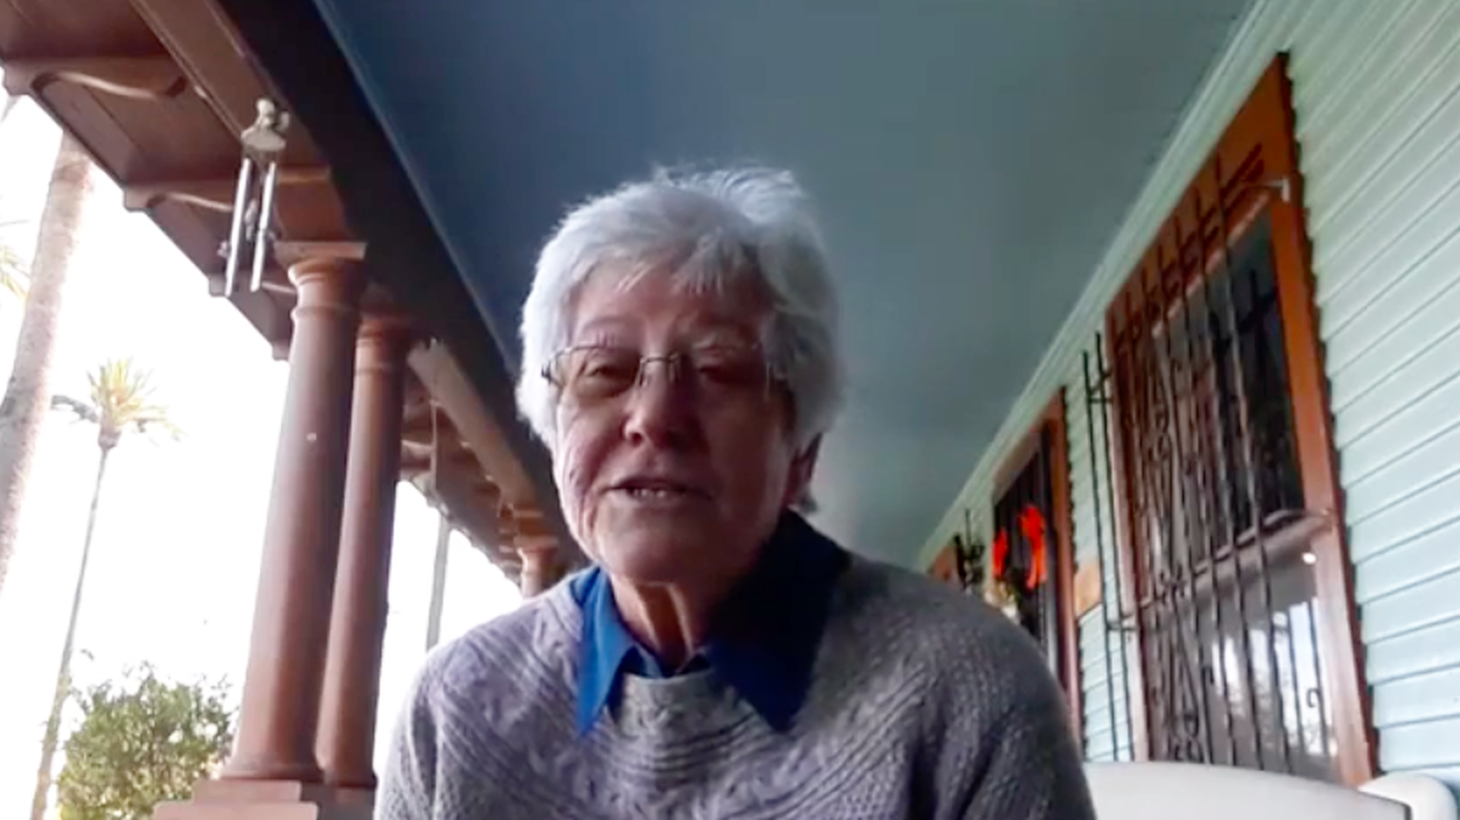 Sister Mary Sean Hodges founded the Partnership for Re-Entry Program (PREP) two decades ago to help prison “lifers” re-enter the community upon release. In this video, she introduces people who’ve made amends.